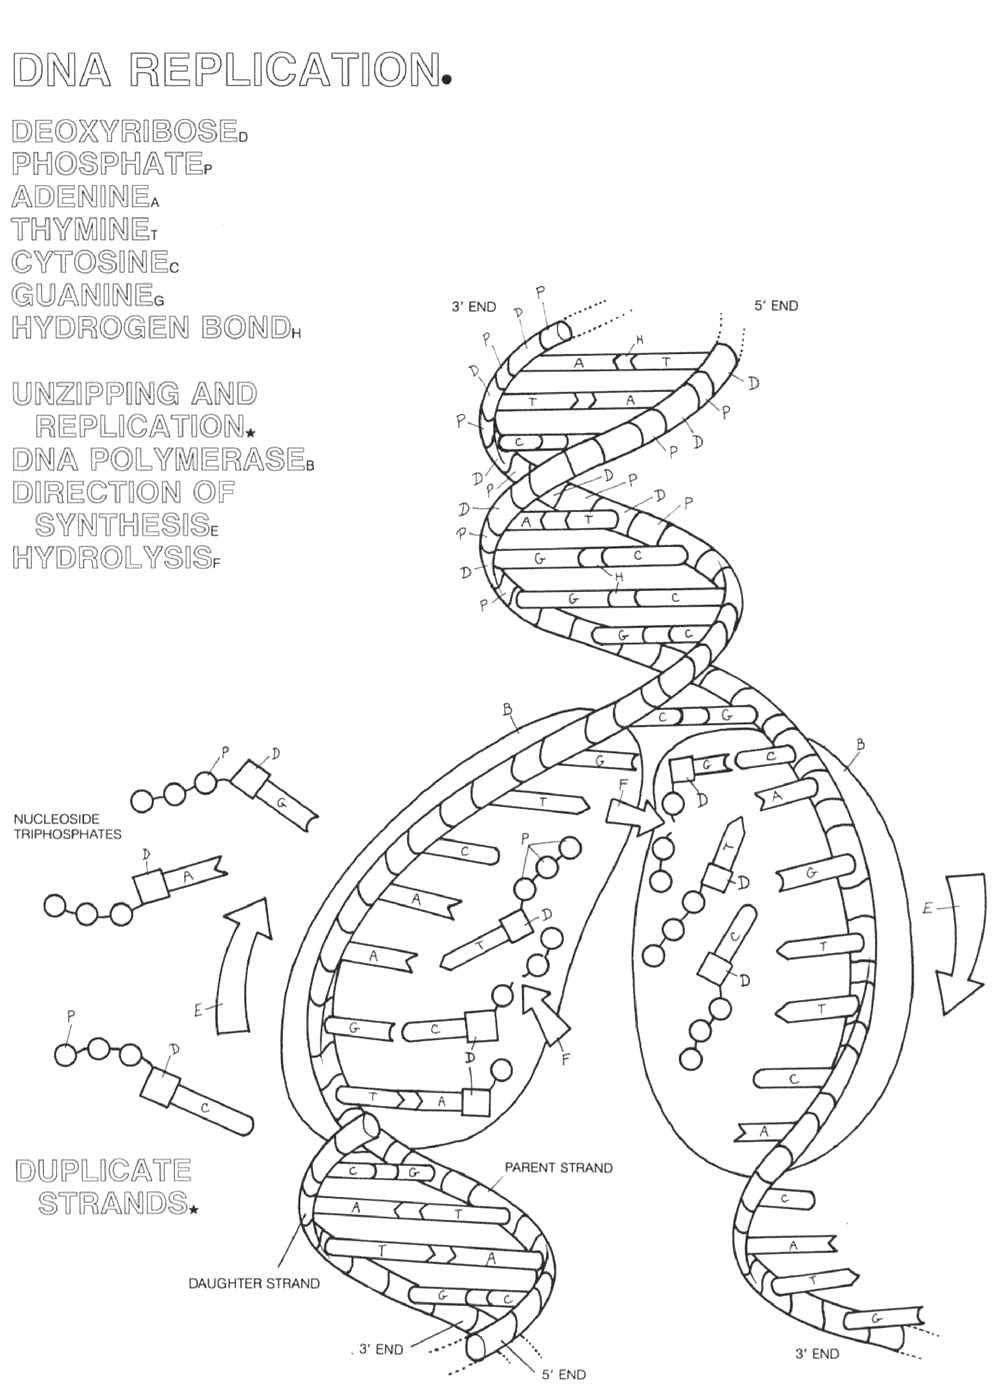 Dna the Double Helix Worksheet 30 Dna the Double Helix Worksheet Answers Worksheet